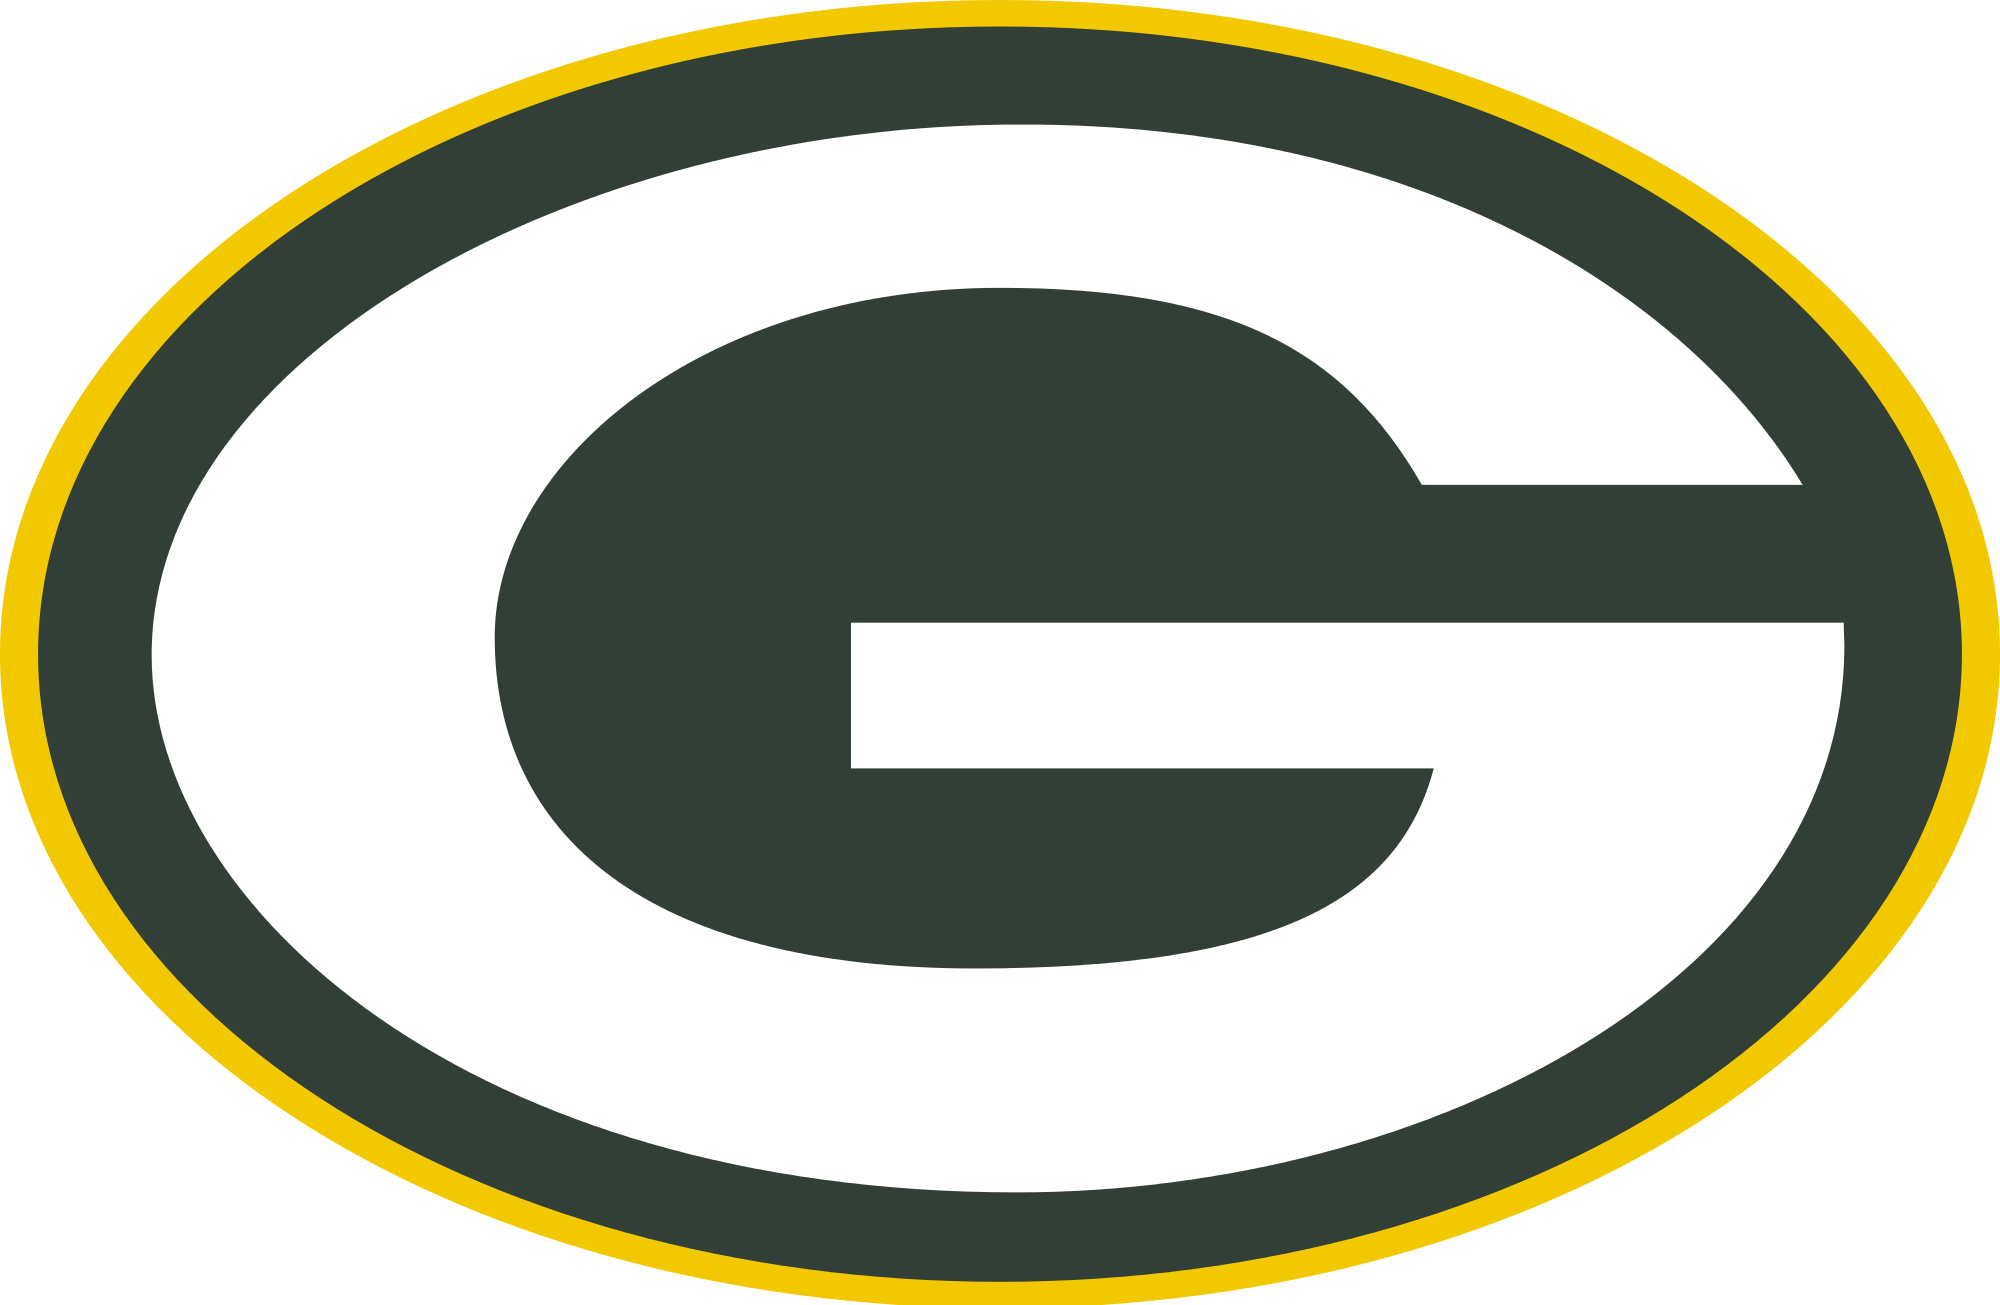 File:Green Bay Packers logo.svg - Wikimedia Commons